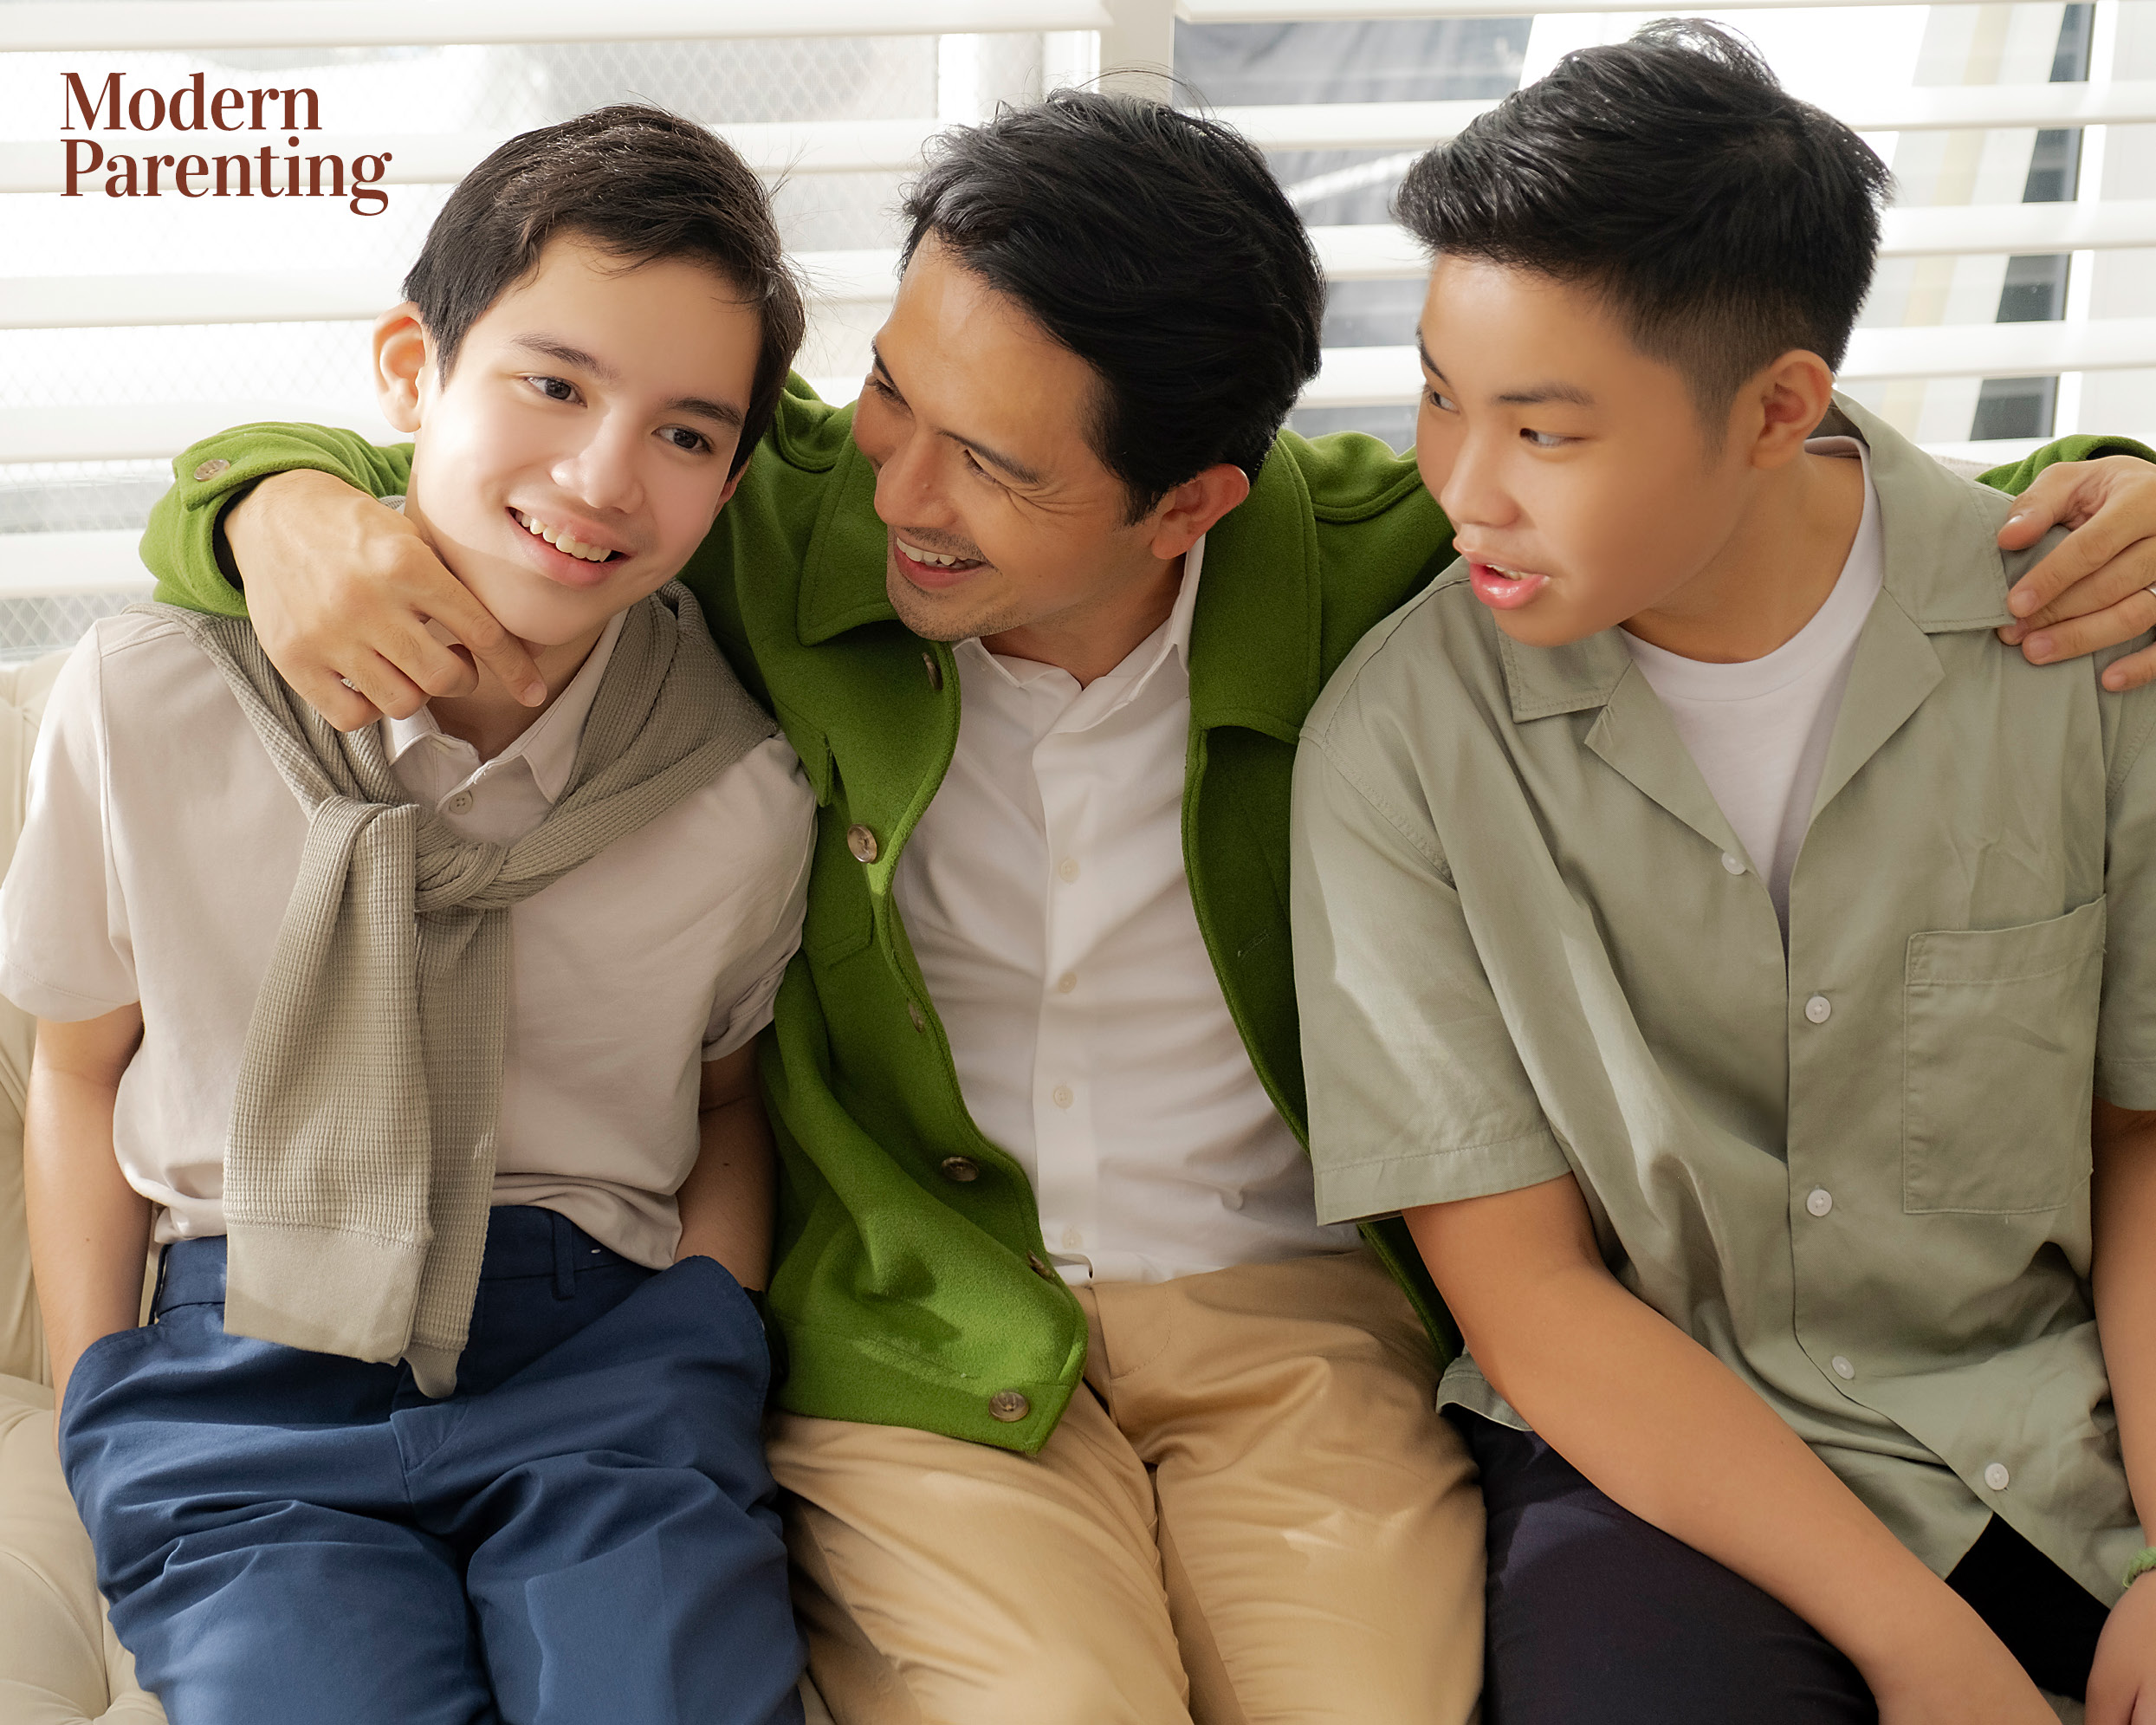 Dennis Trillo and sons